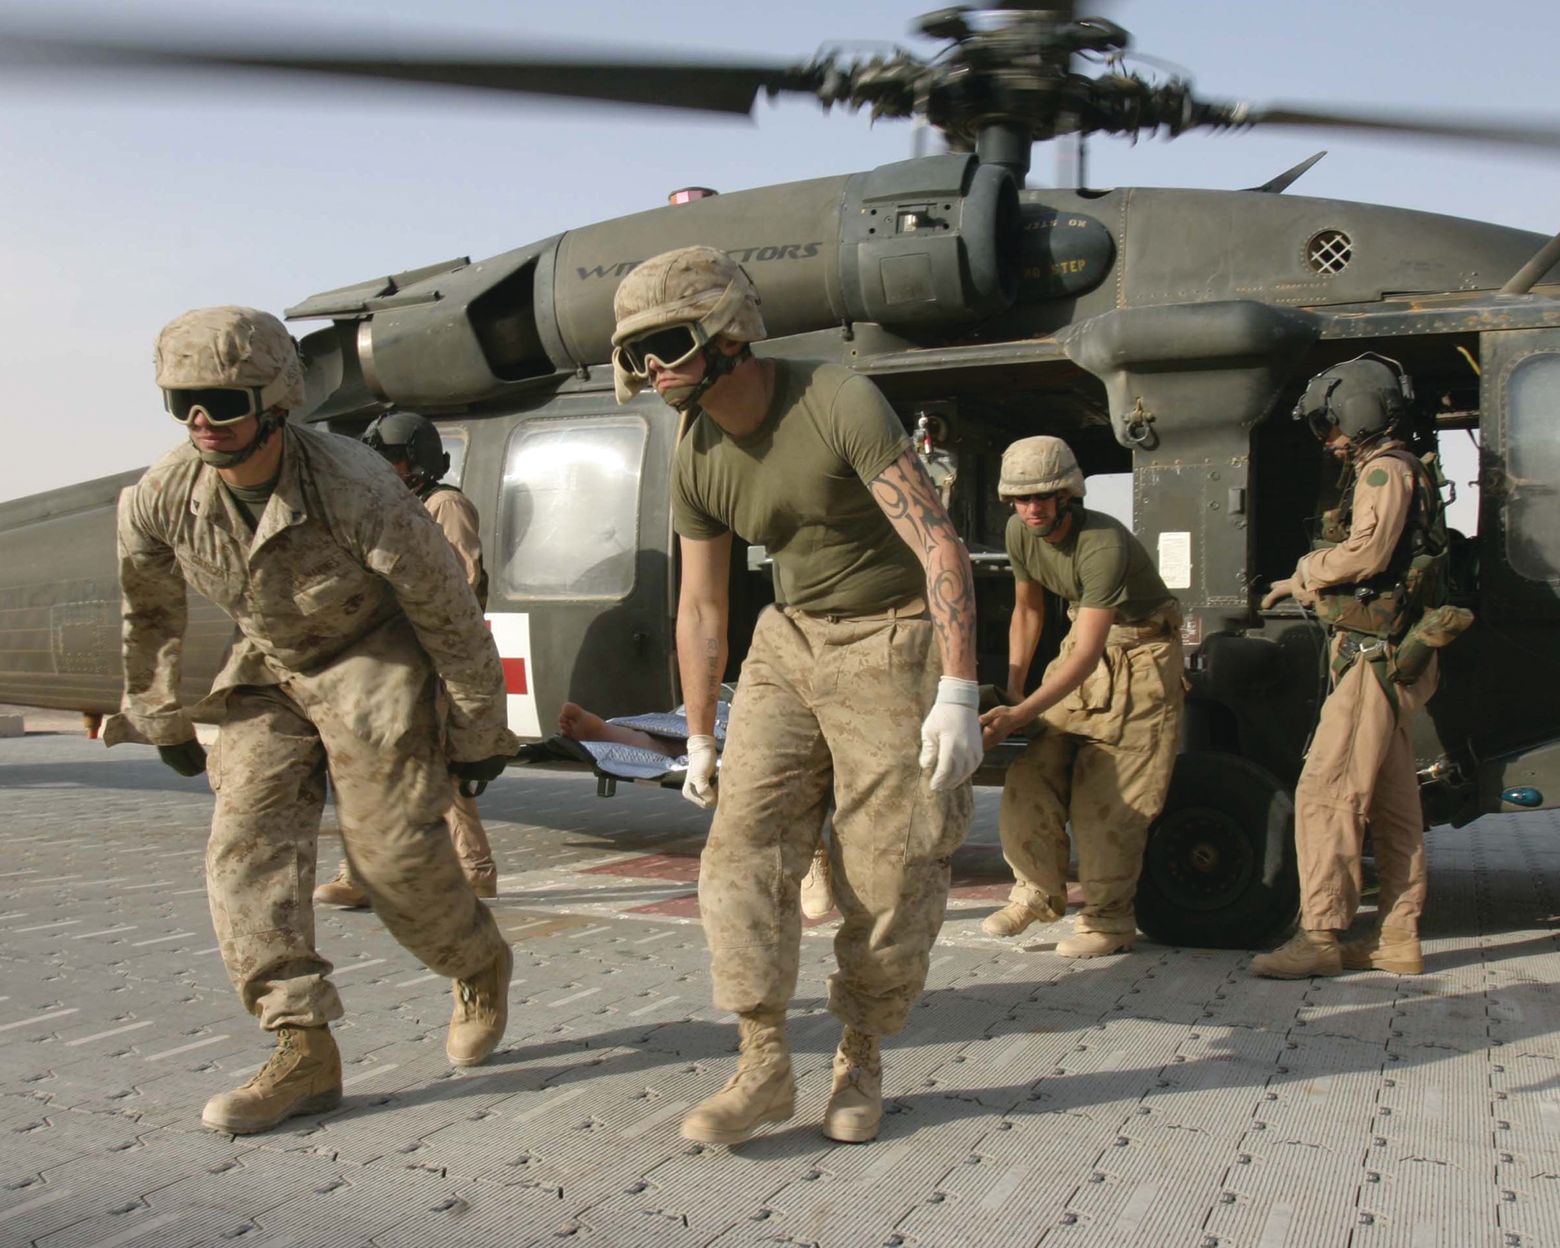 U.S. Marines unload a wounded fellow Marine from an Army UH-60 Blackhawk helicopter at Al Qaim, Iraq, in 2005.